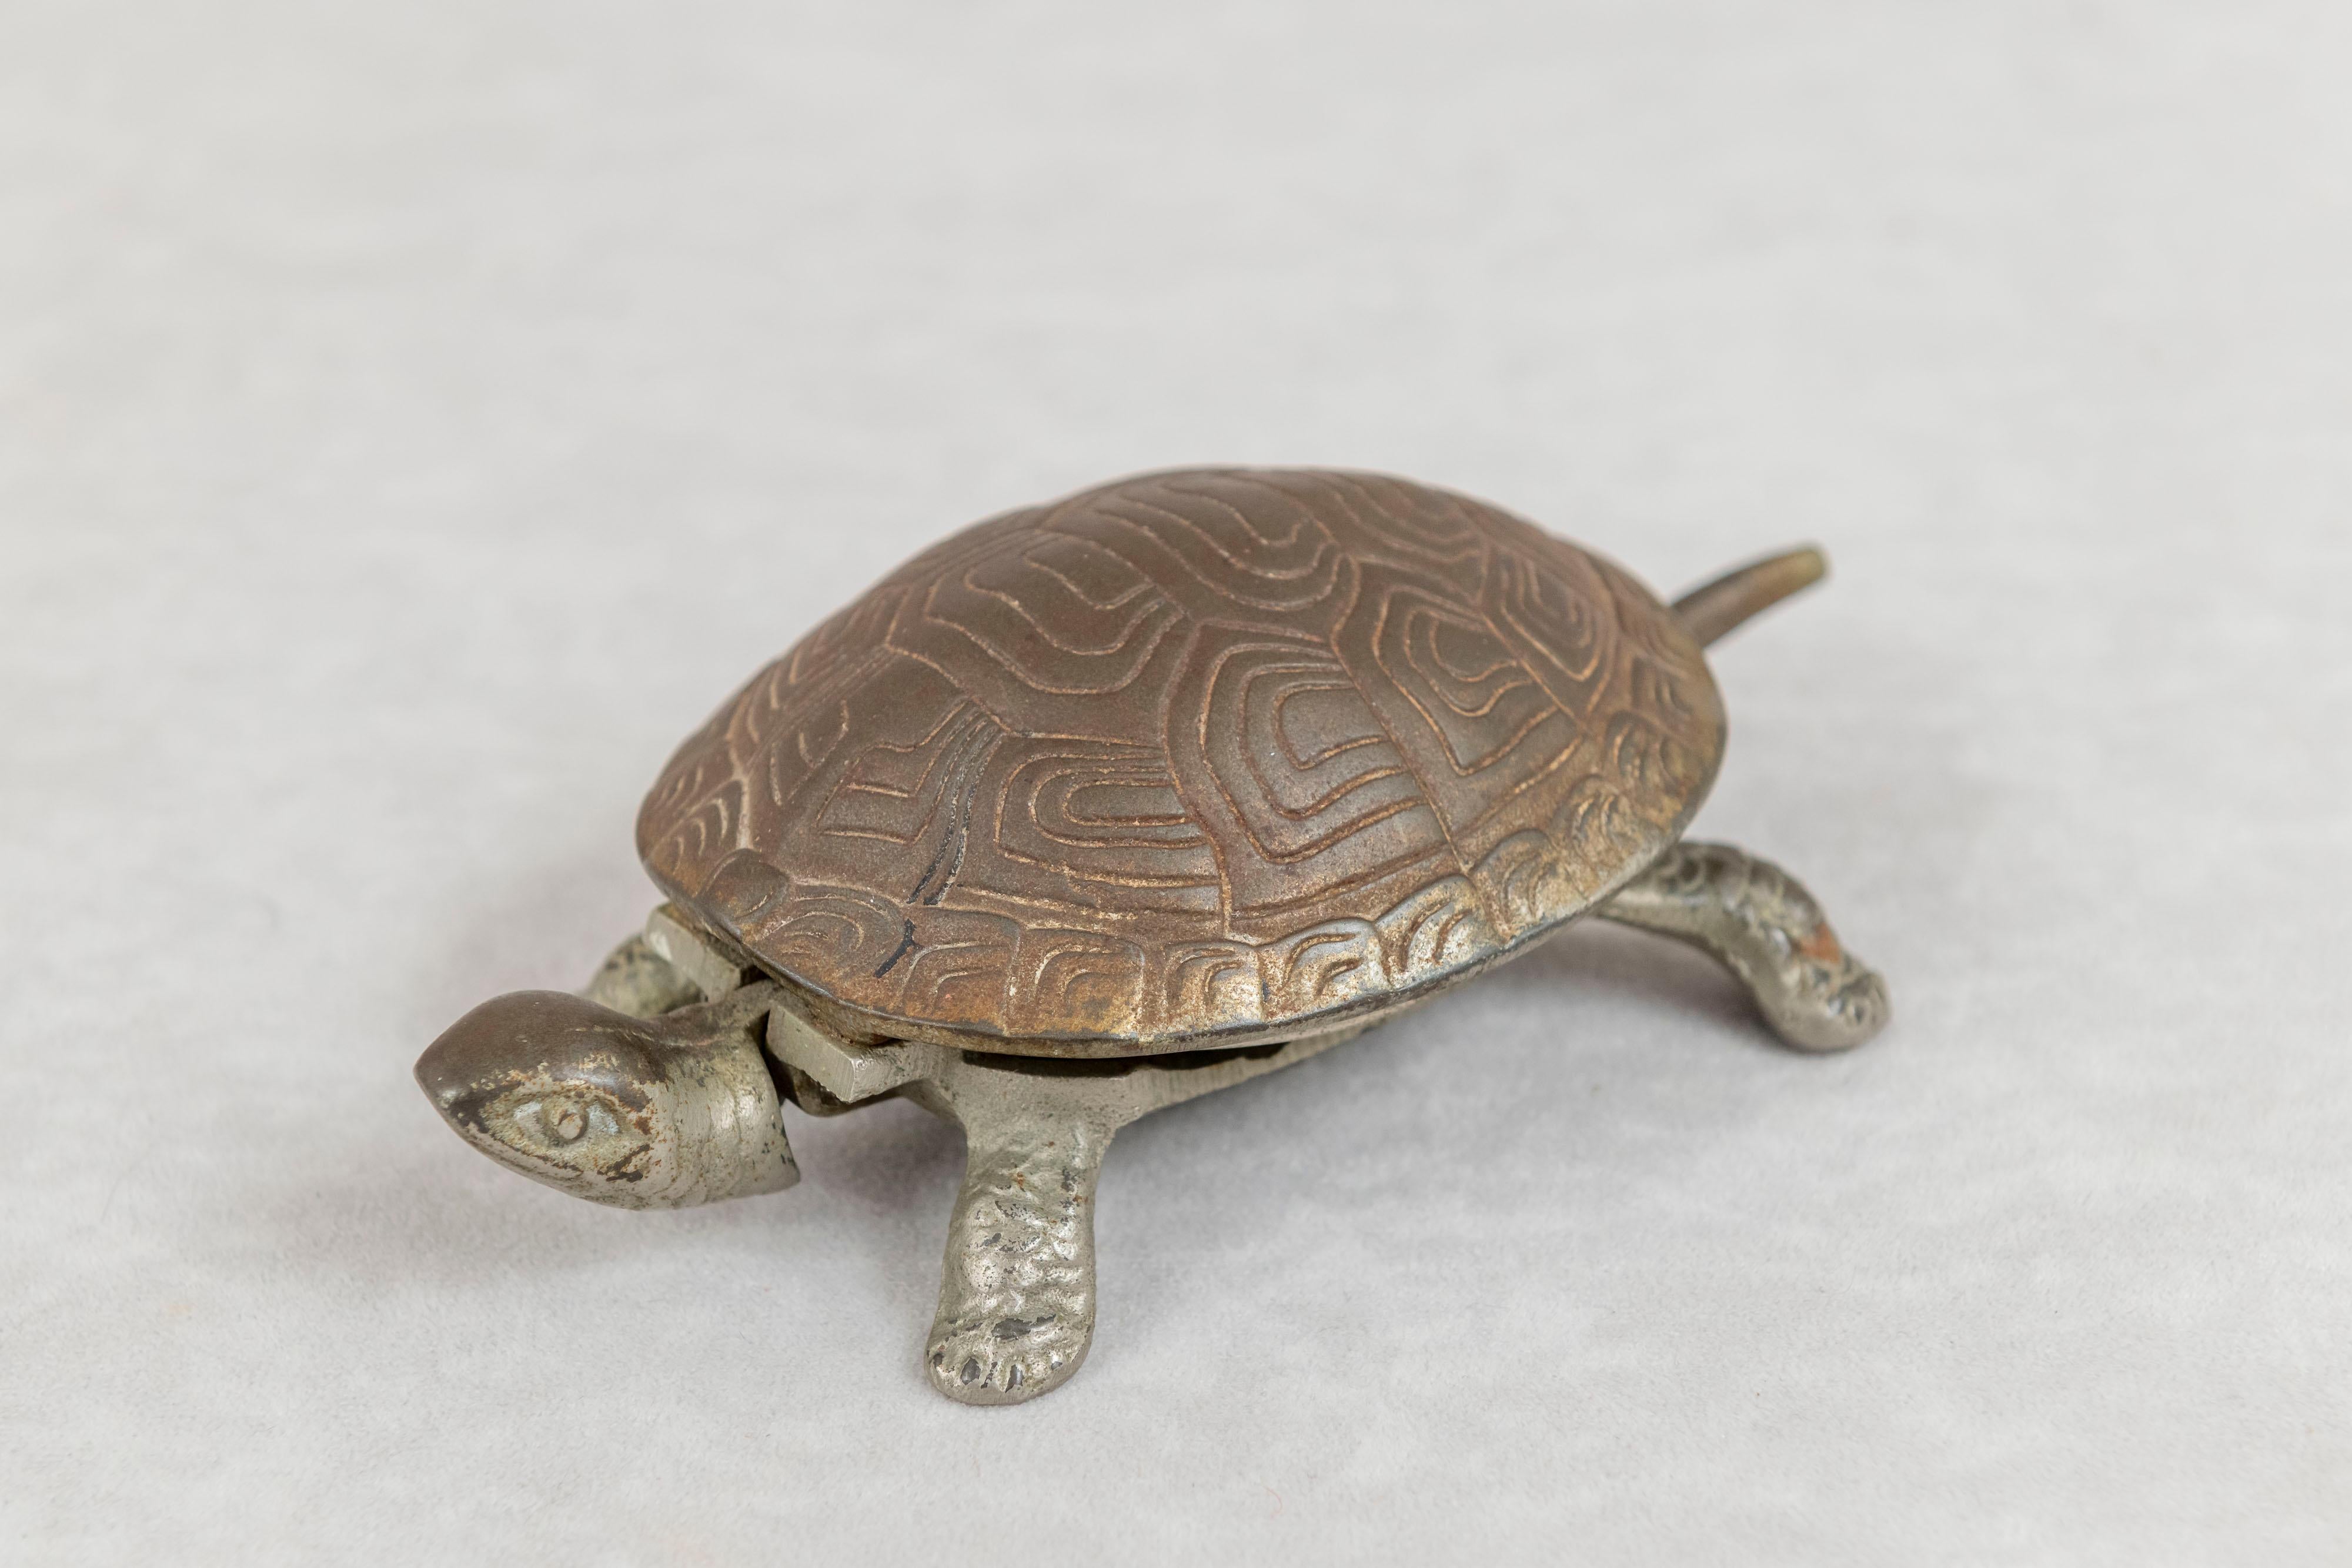 This turtle was used on hotel counter tops to be rung and attract the attention of a staff member. Just tap the turtle on the head to produce this nicely pitched bell sound. The turtle itself is well modeled and nickel plated. The underside reveals